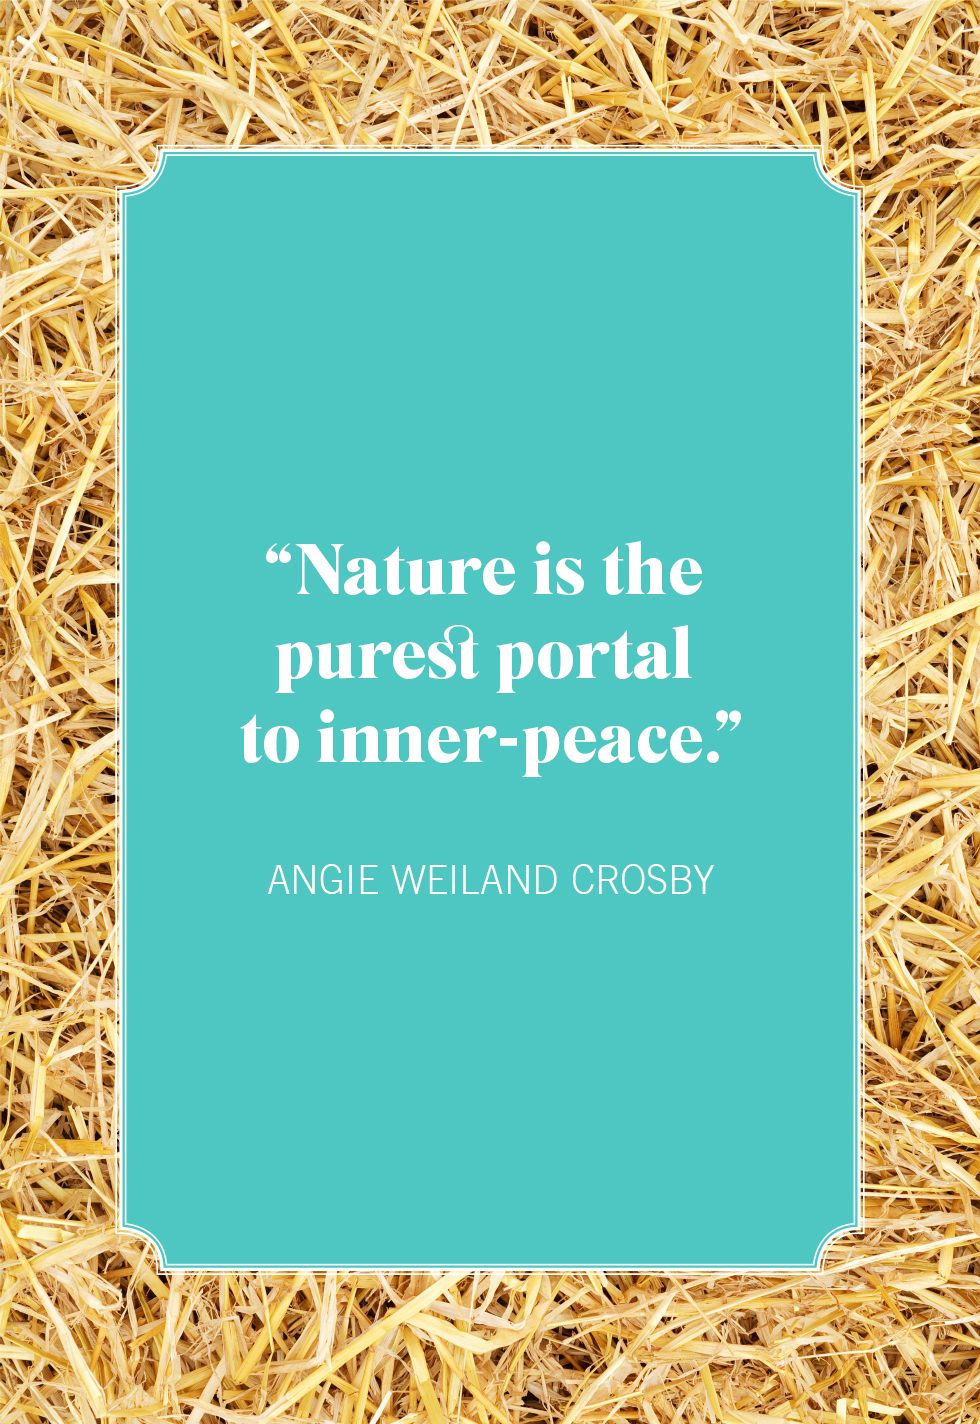 40 Best Nature Quotes - Short Sayings About Natural Beauty